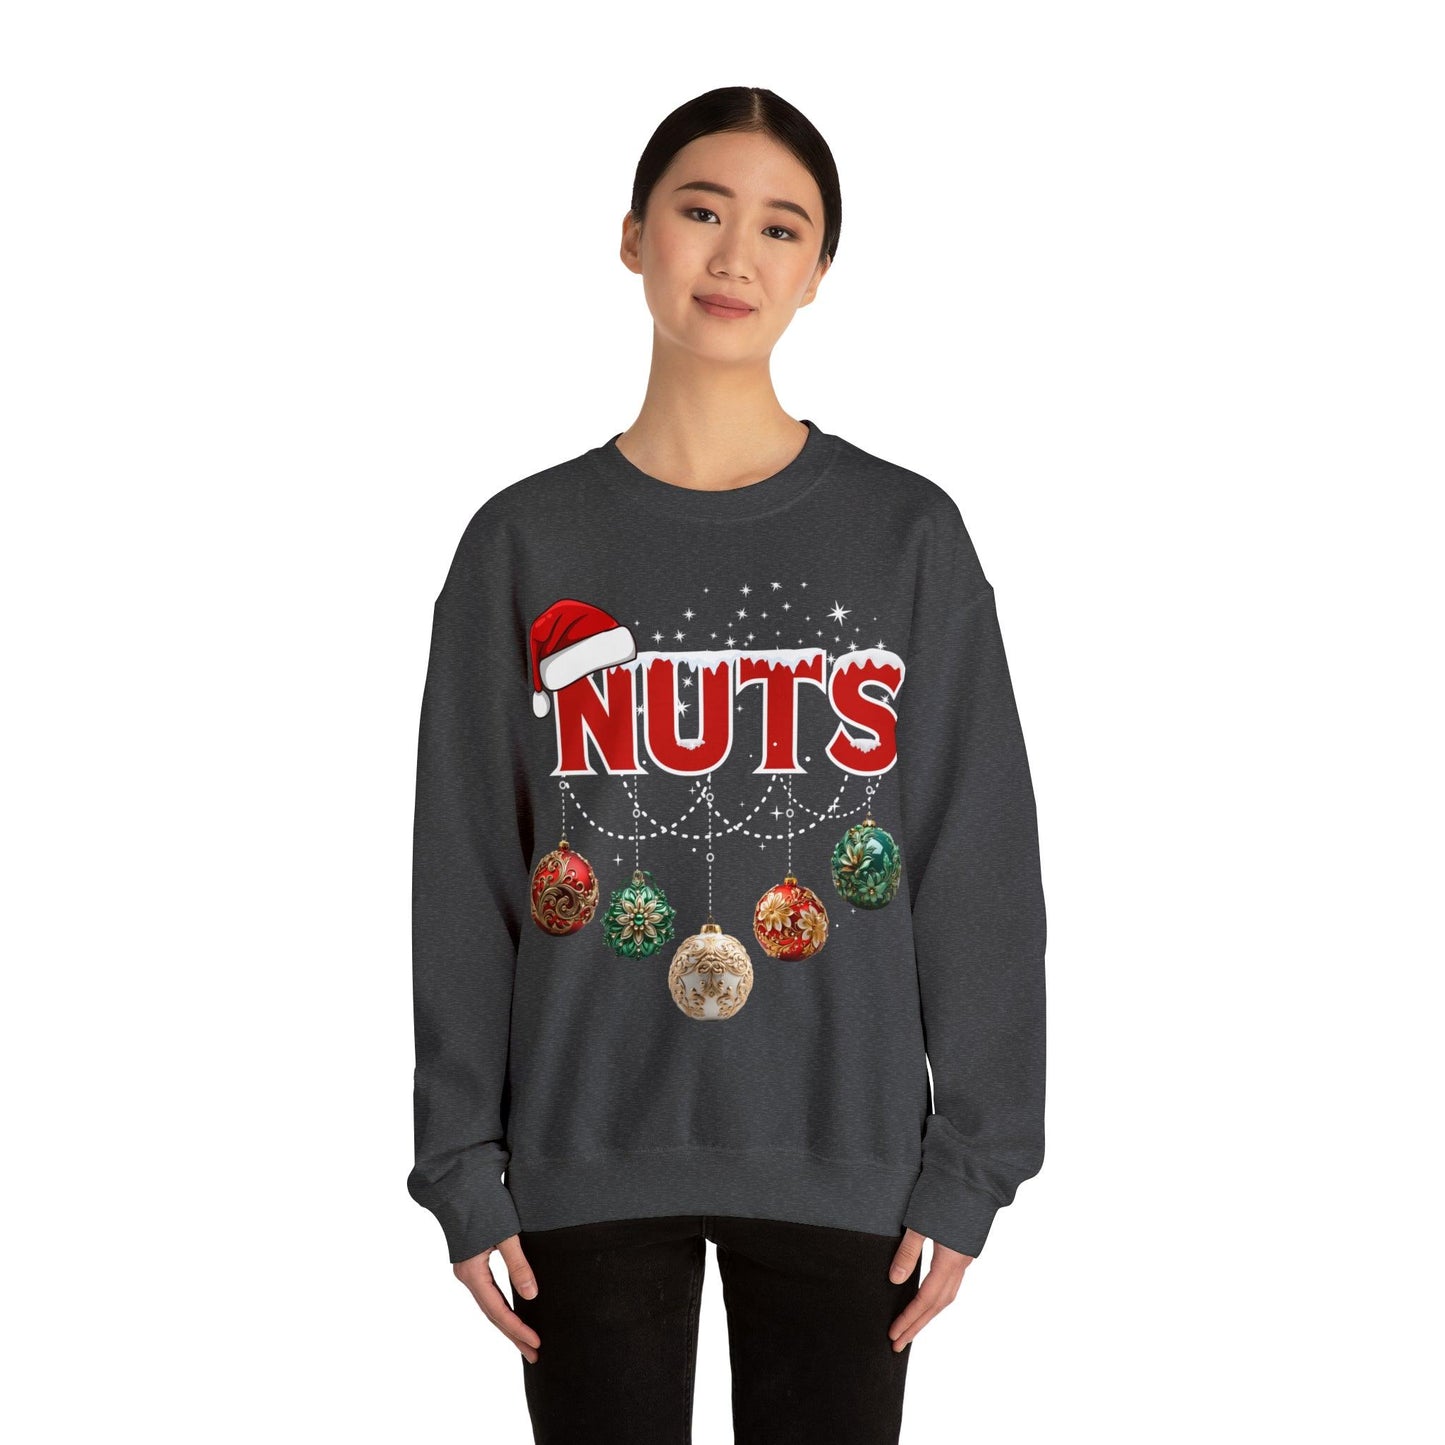 Funny Christmas Matching Shirts Chest Nuts Couples Matching Shirts Holiday Shirt Cute Christmas Shirt Couple Sweater, Family Tee - Giftsmojo